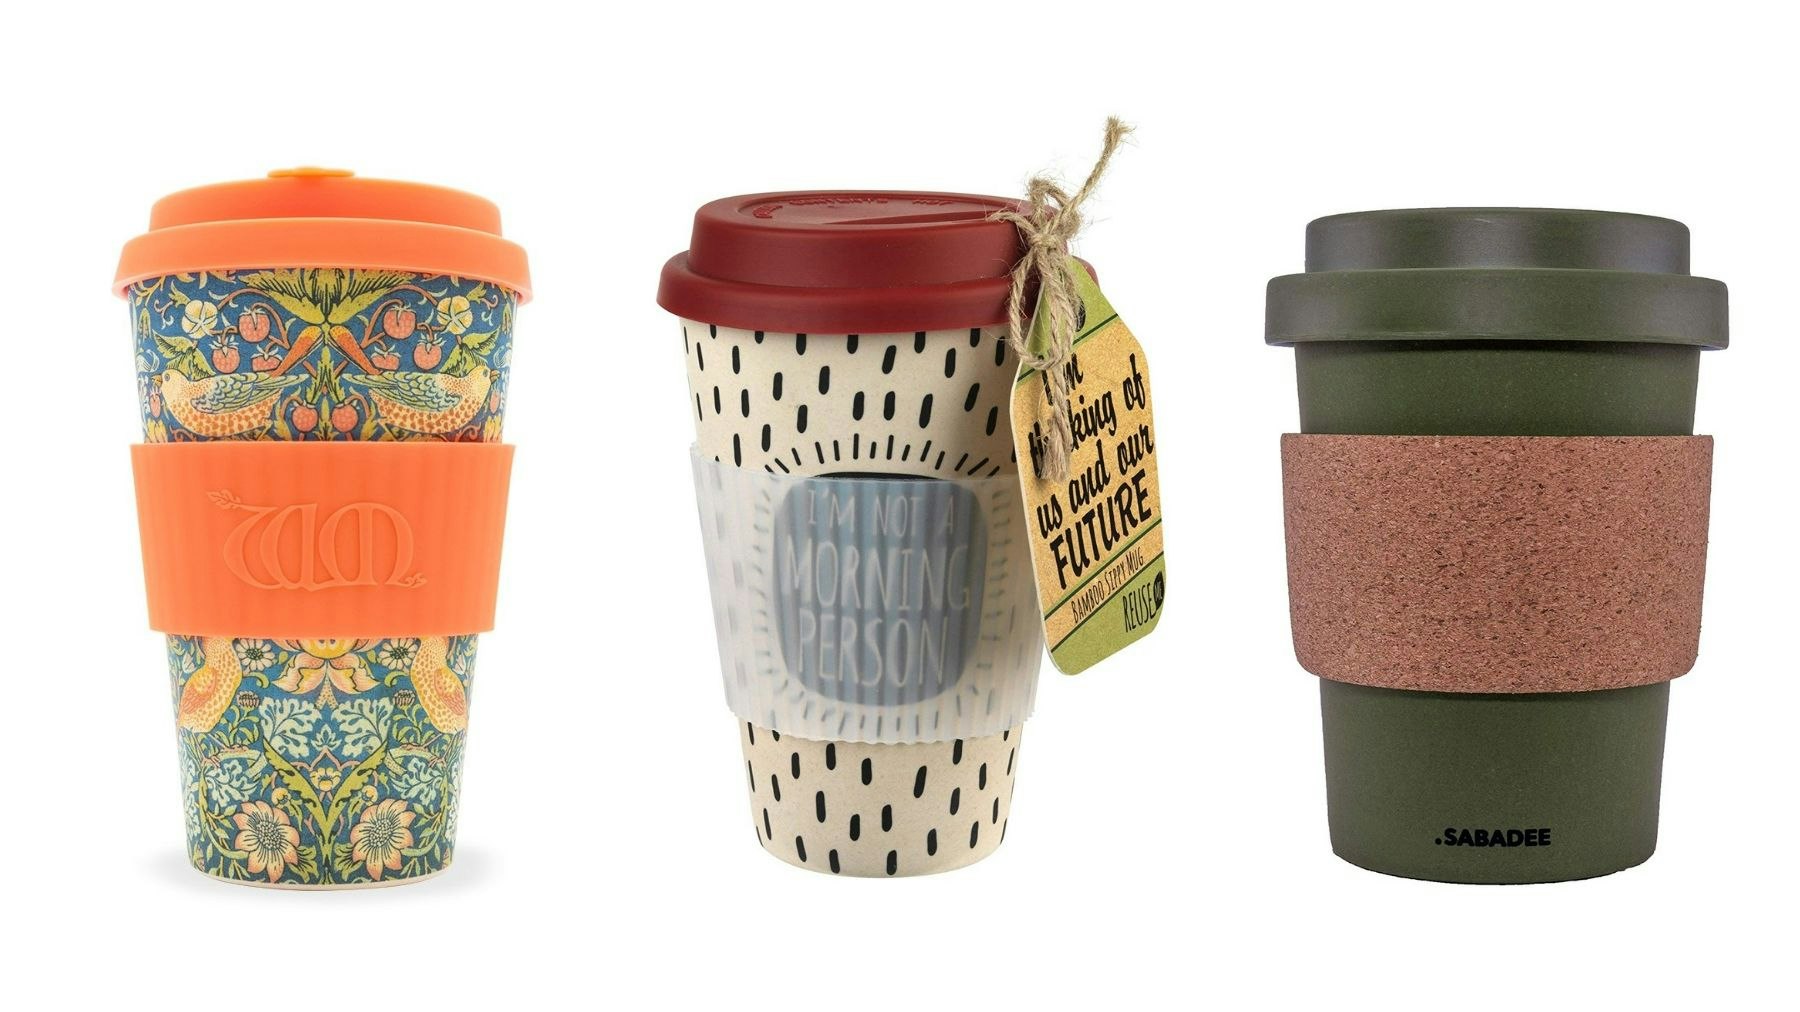  Ecoffee Cup Reusable Sustainable To-Go Travel Coffee